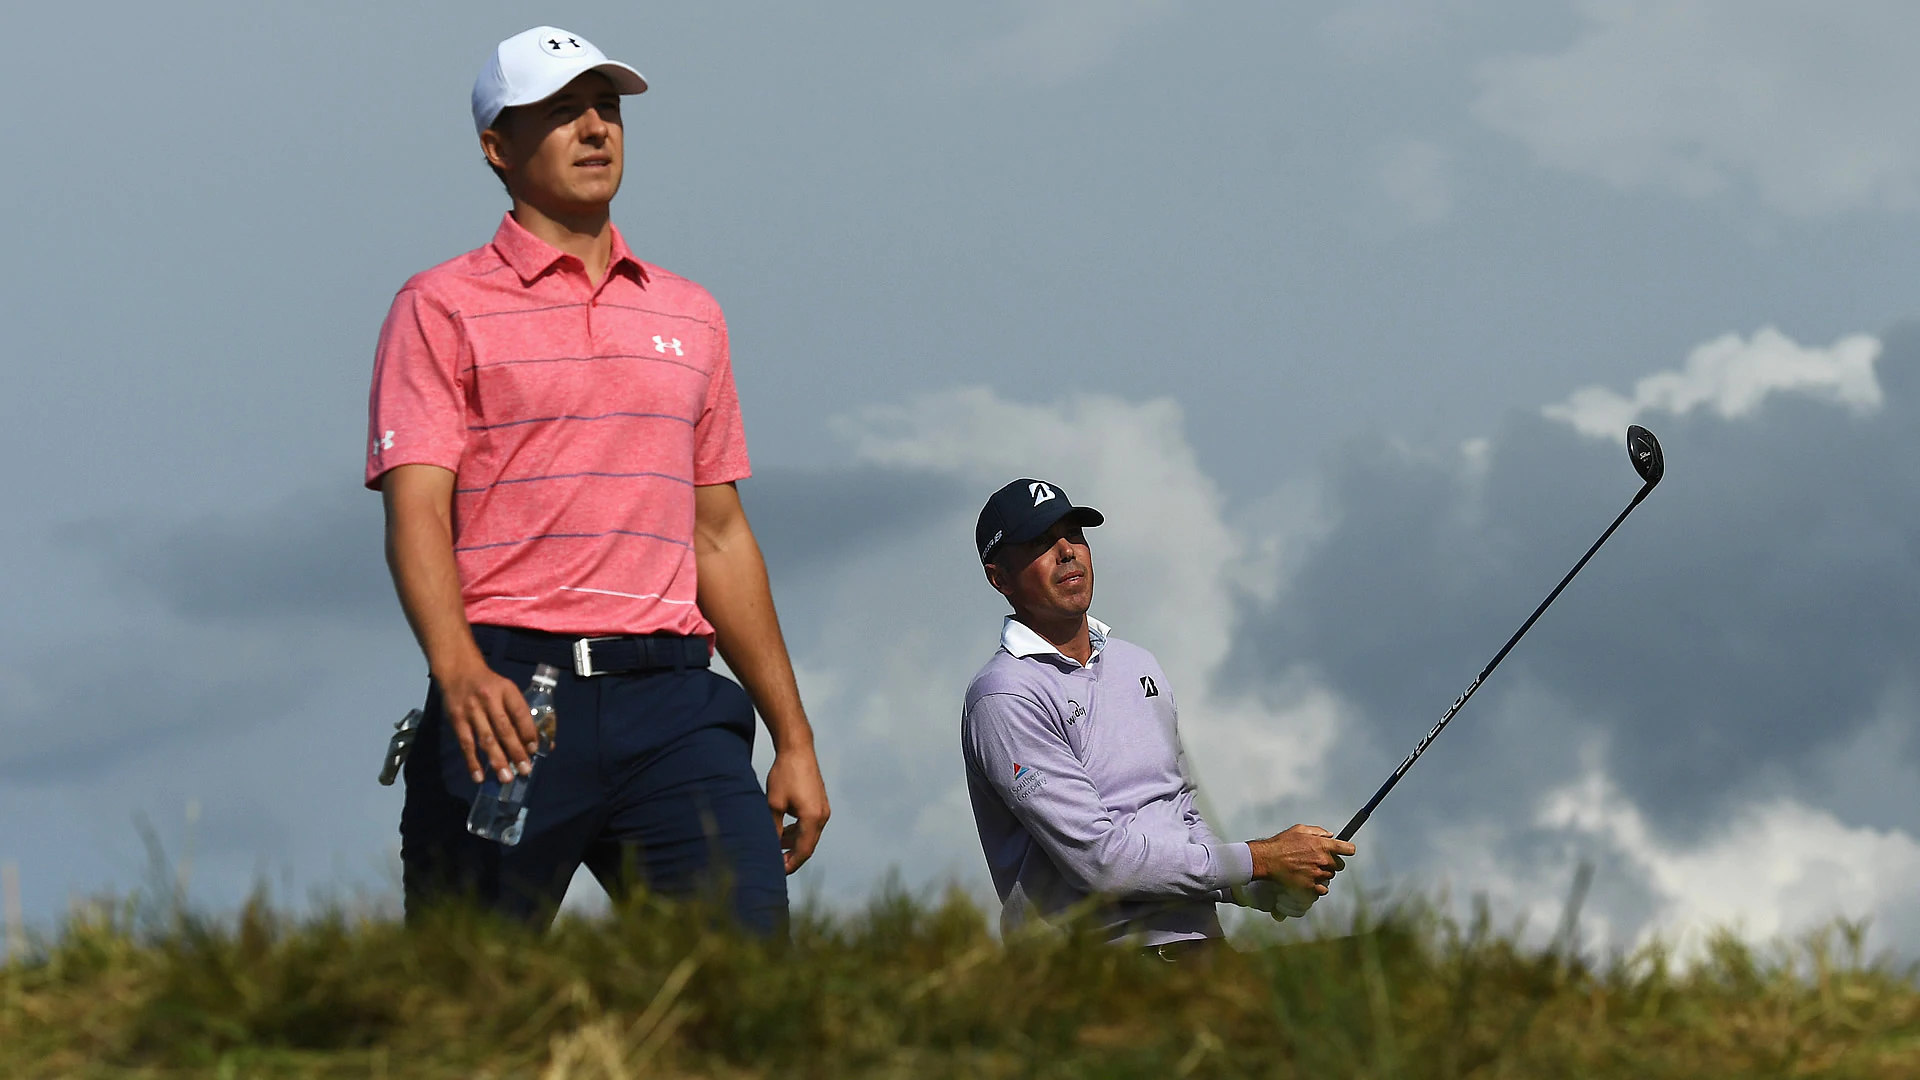 Spieth overwhelming favorite at 1-4 odds to win Open